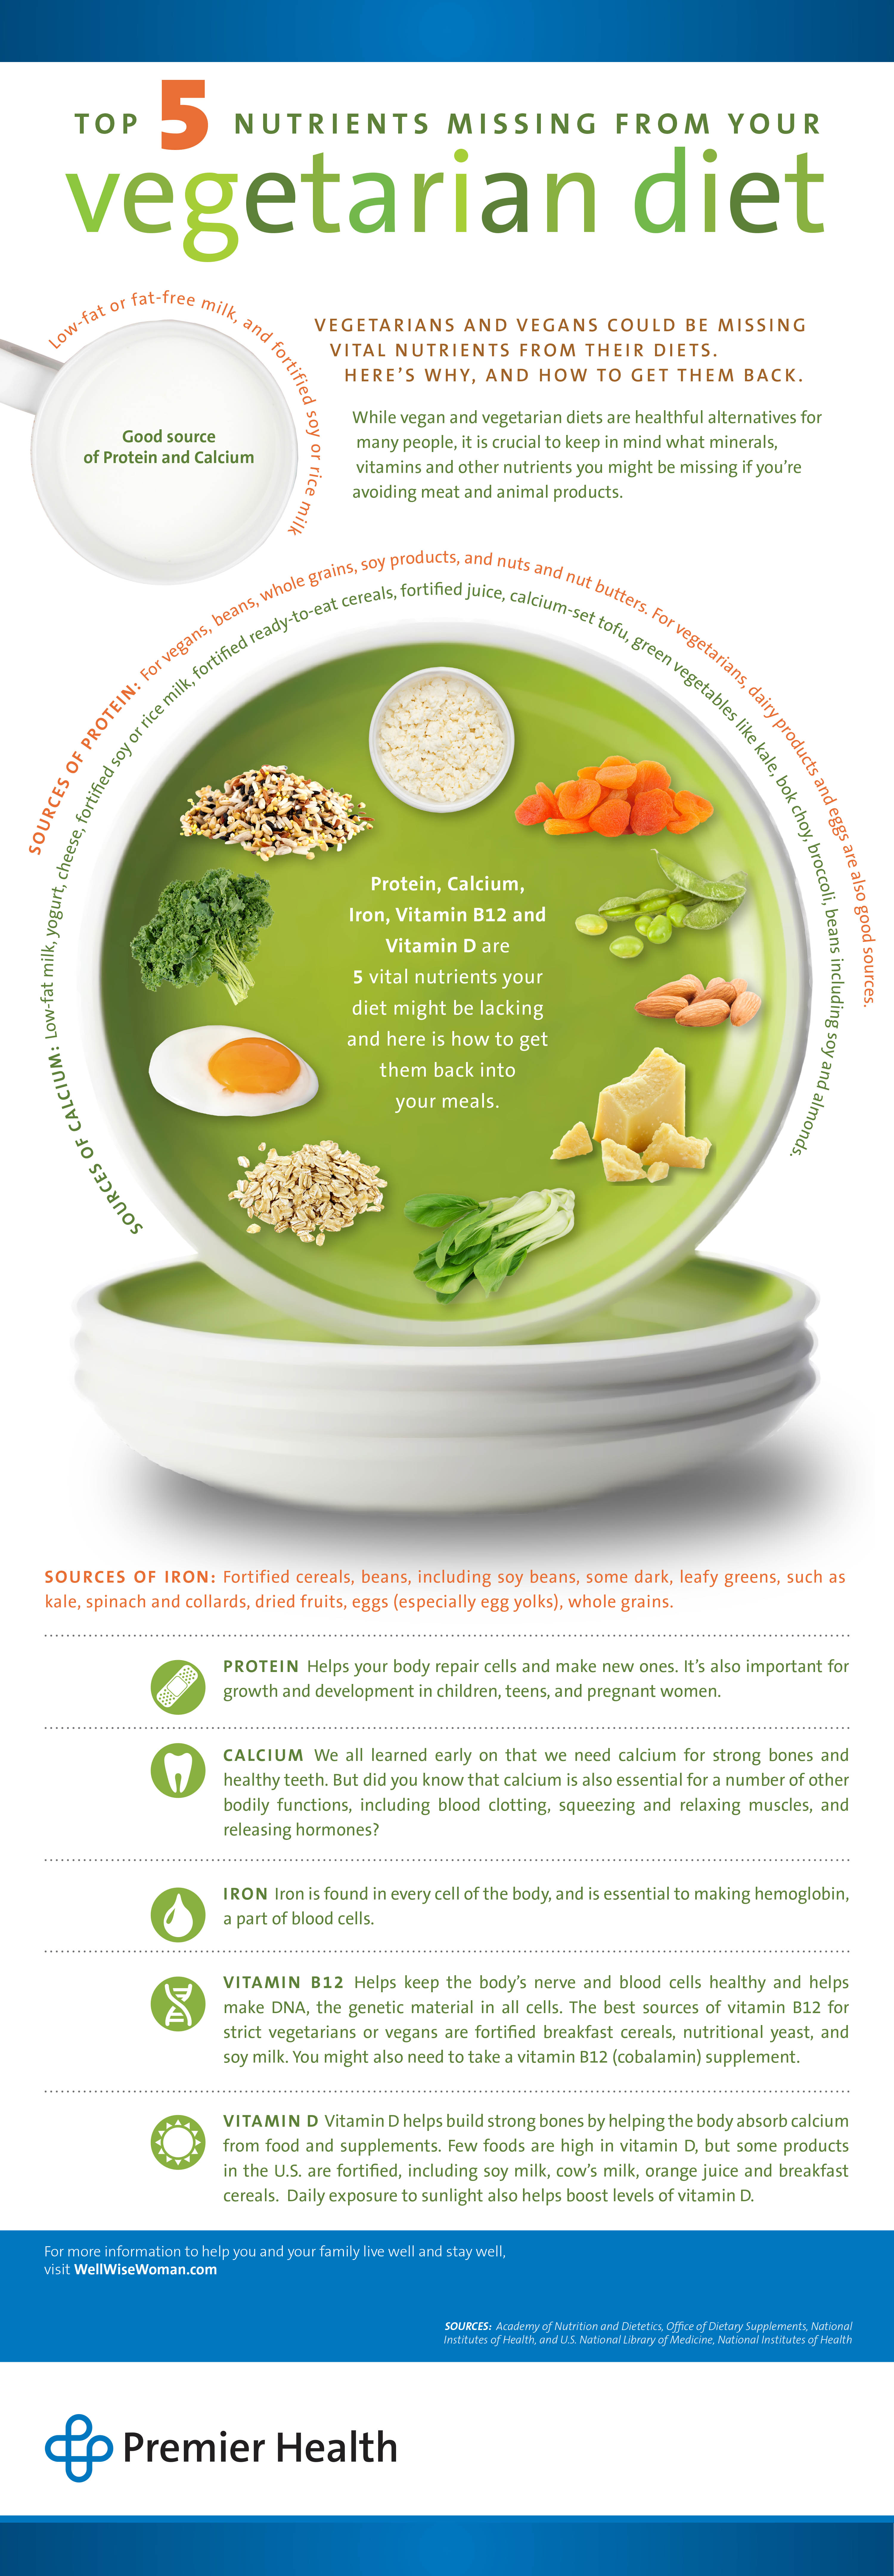 5 Nutrients Missing From Your Vegetarian Diet - Infographic